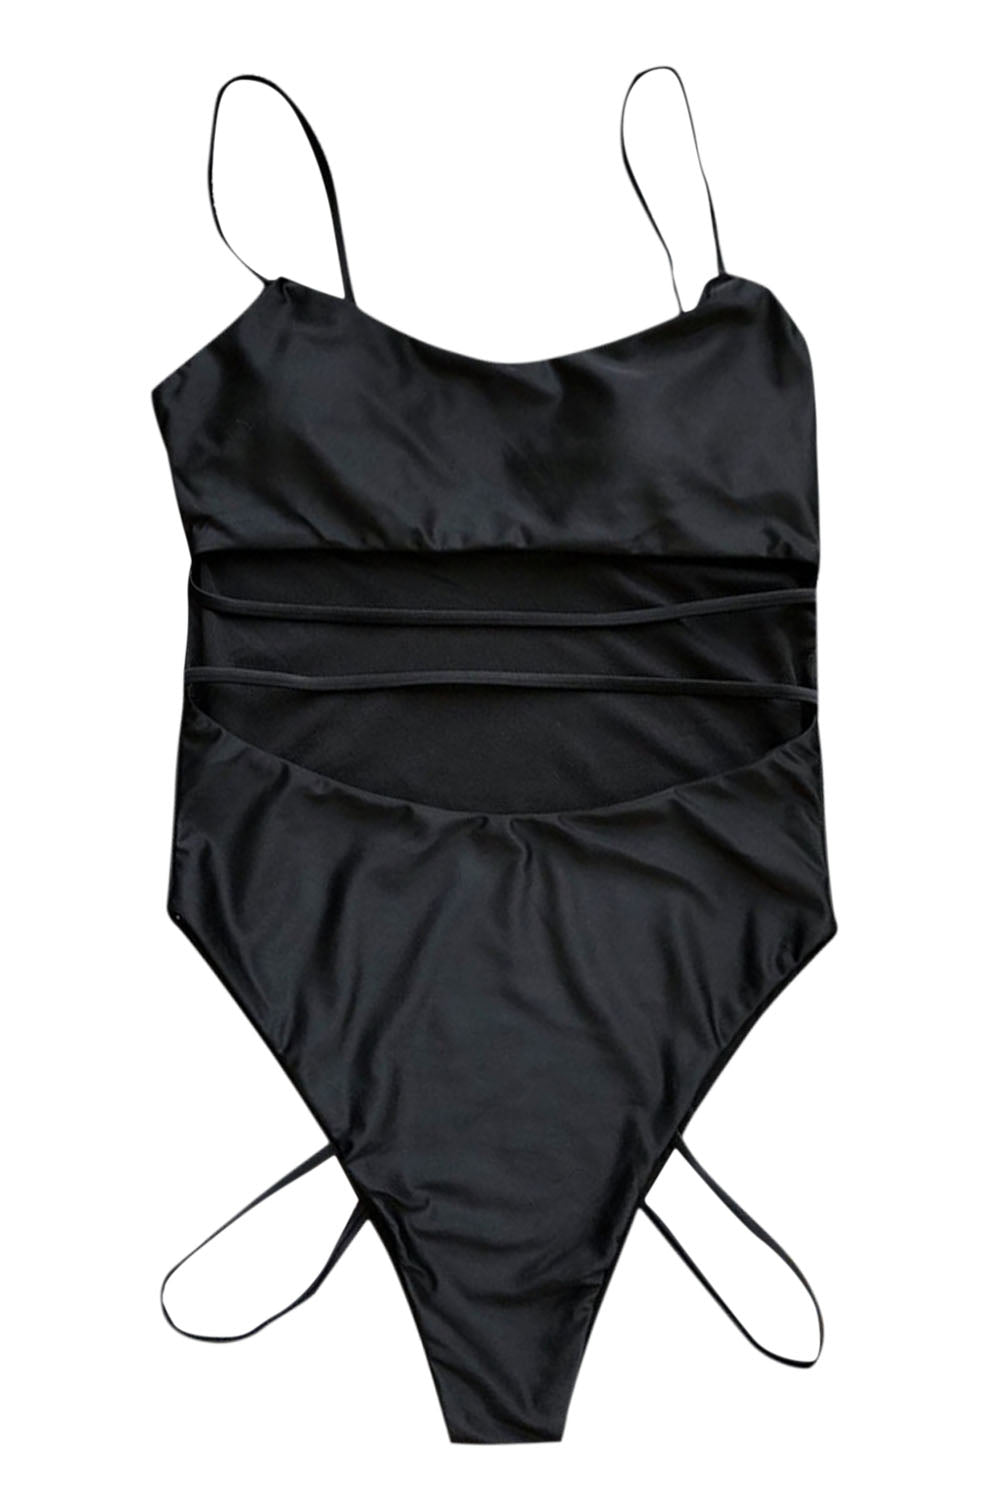 Iyasson Women's Sexy Low-cut Camisole Multiple Ties One-piece Swimsuit